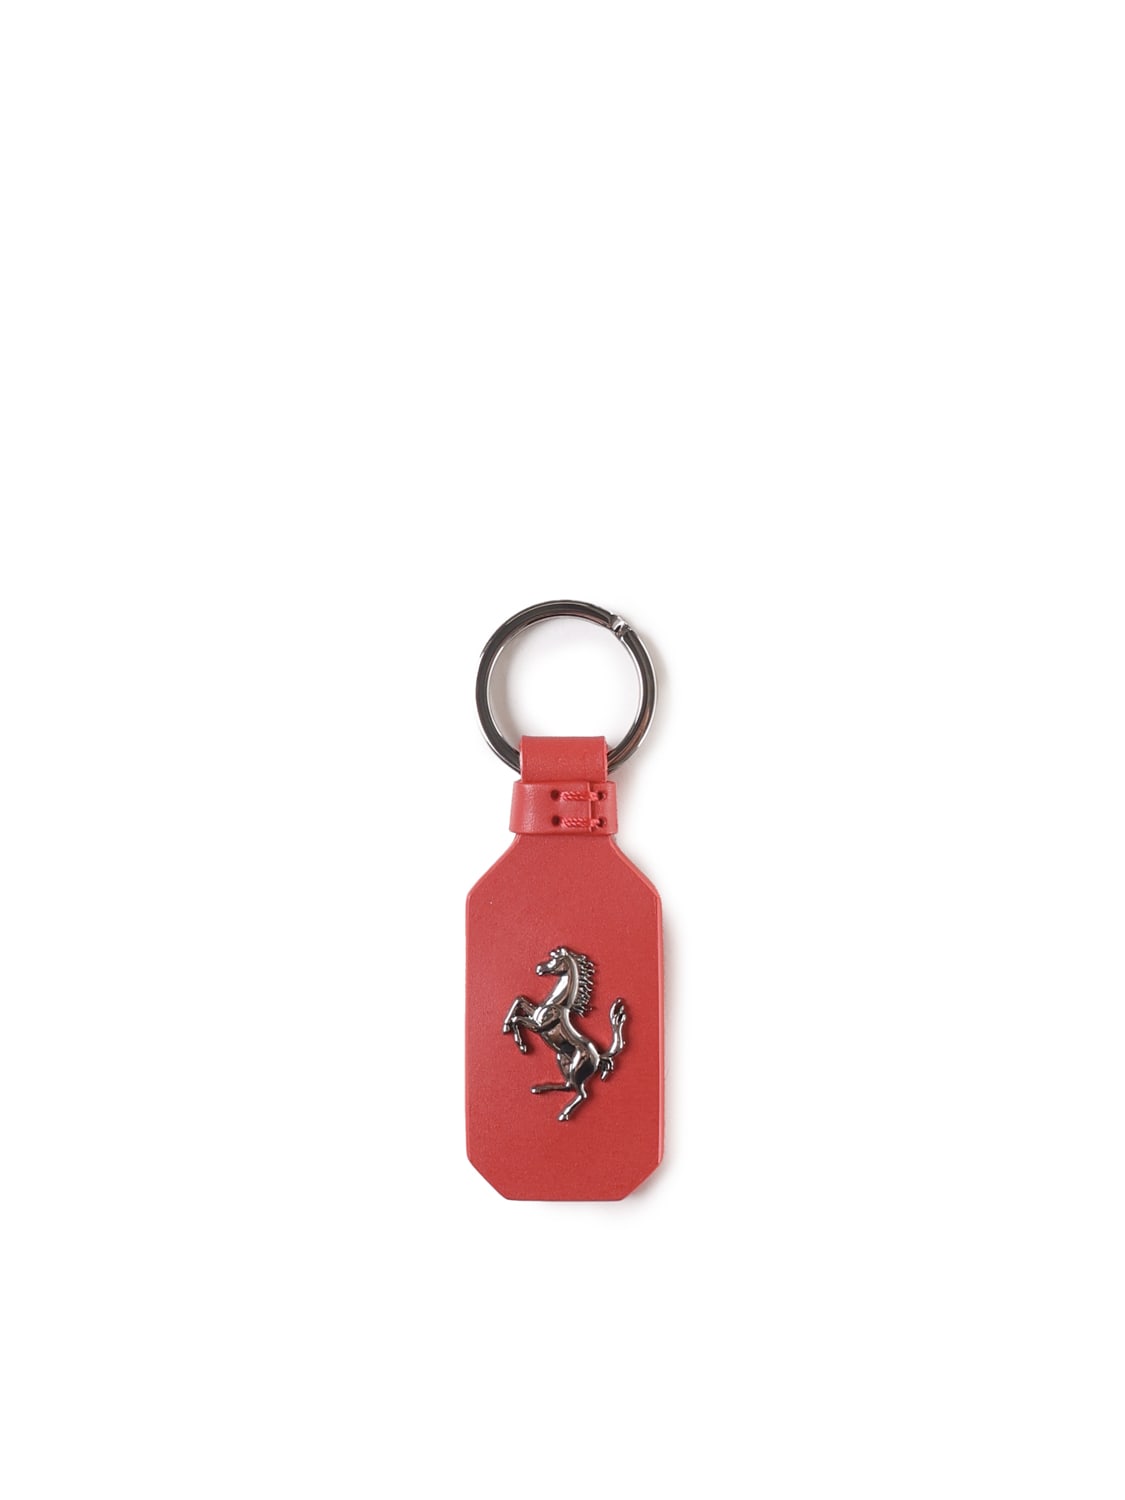 Leather Key Ring With Metal Prancing Horse